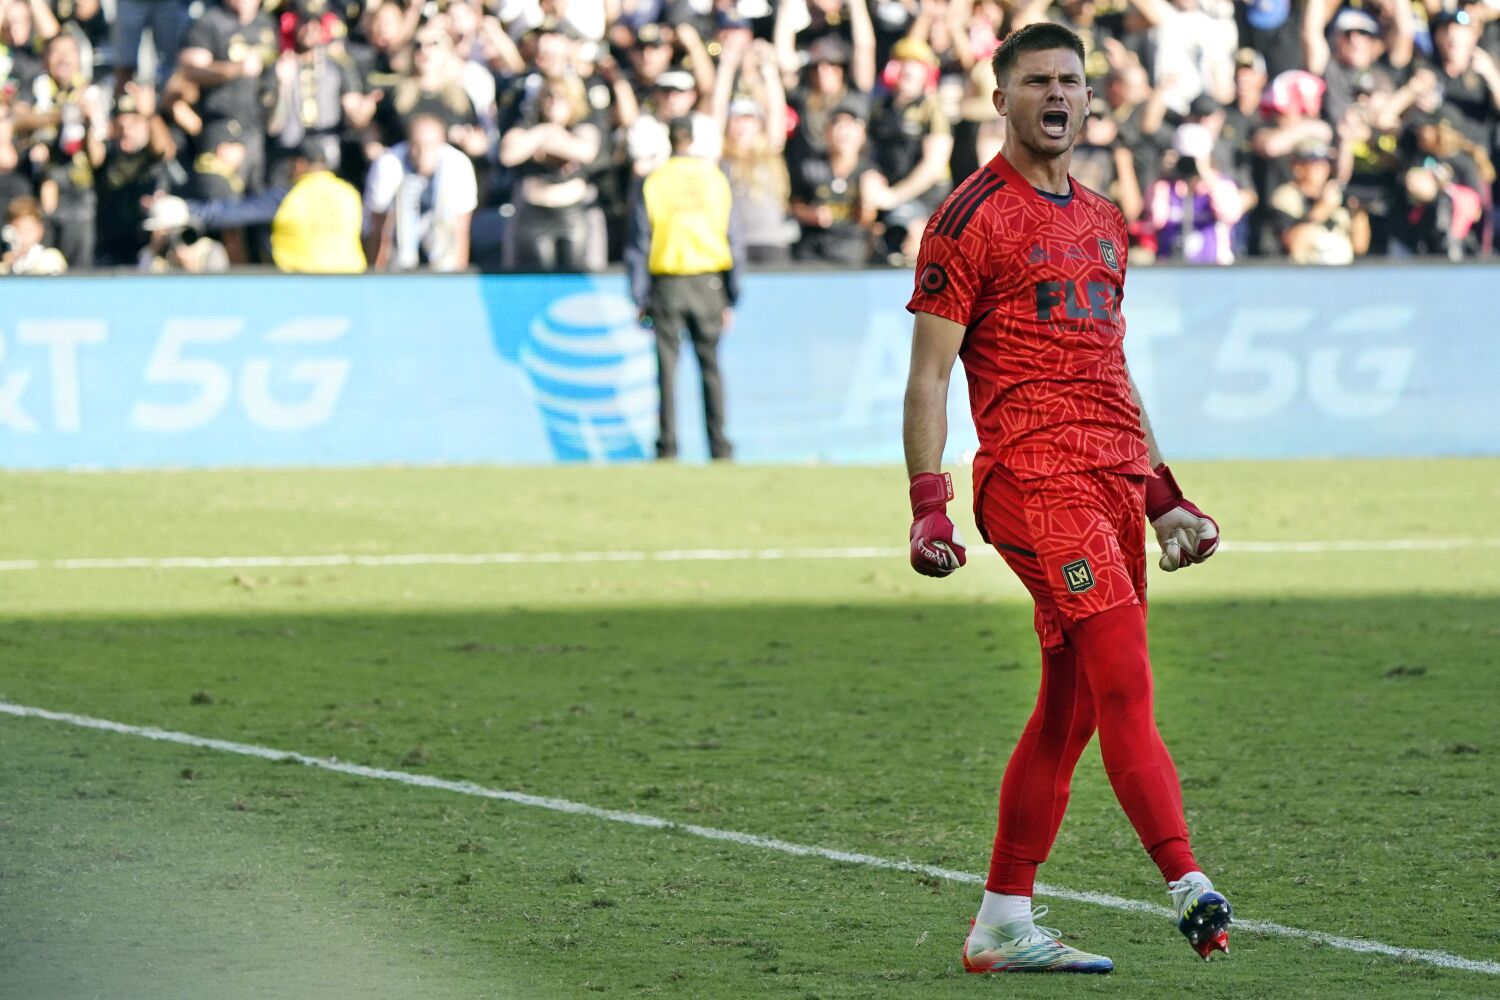 LAFC goalie John McCarthy aims to build on his career from MLS Cup moment